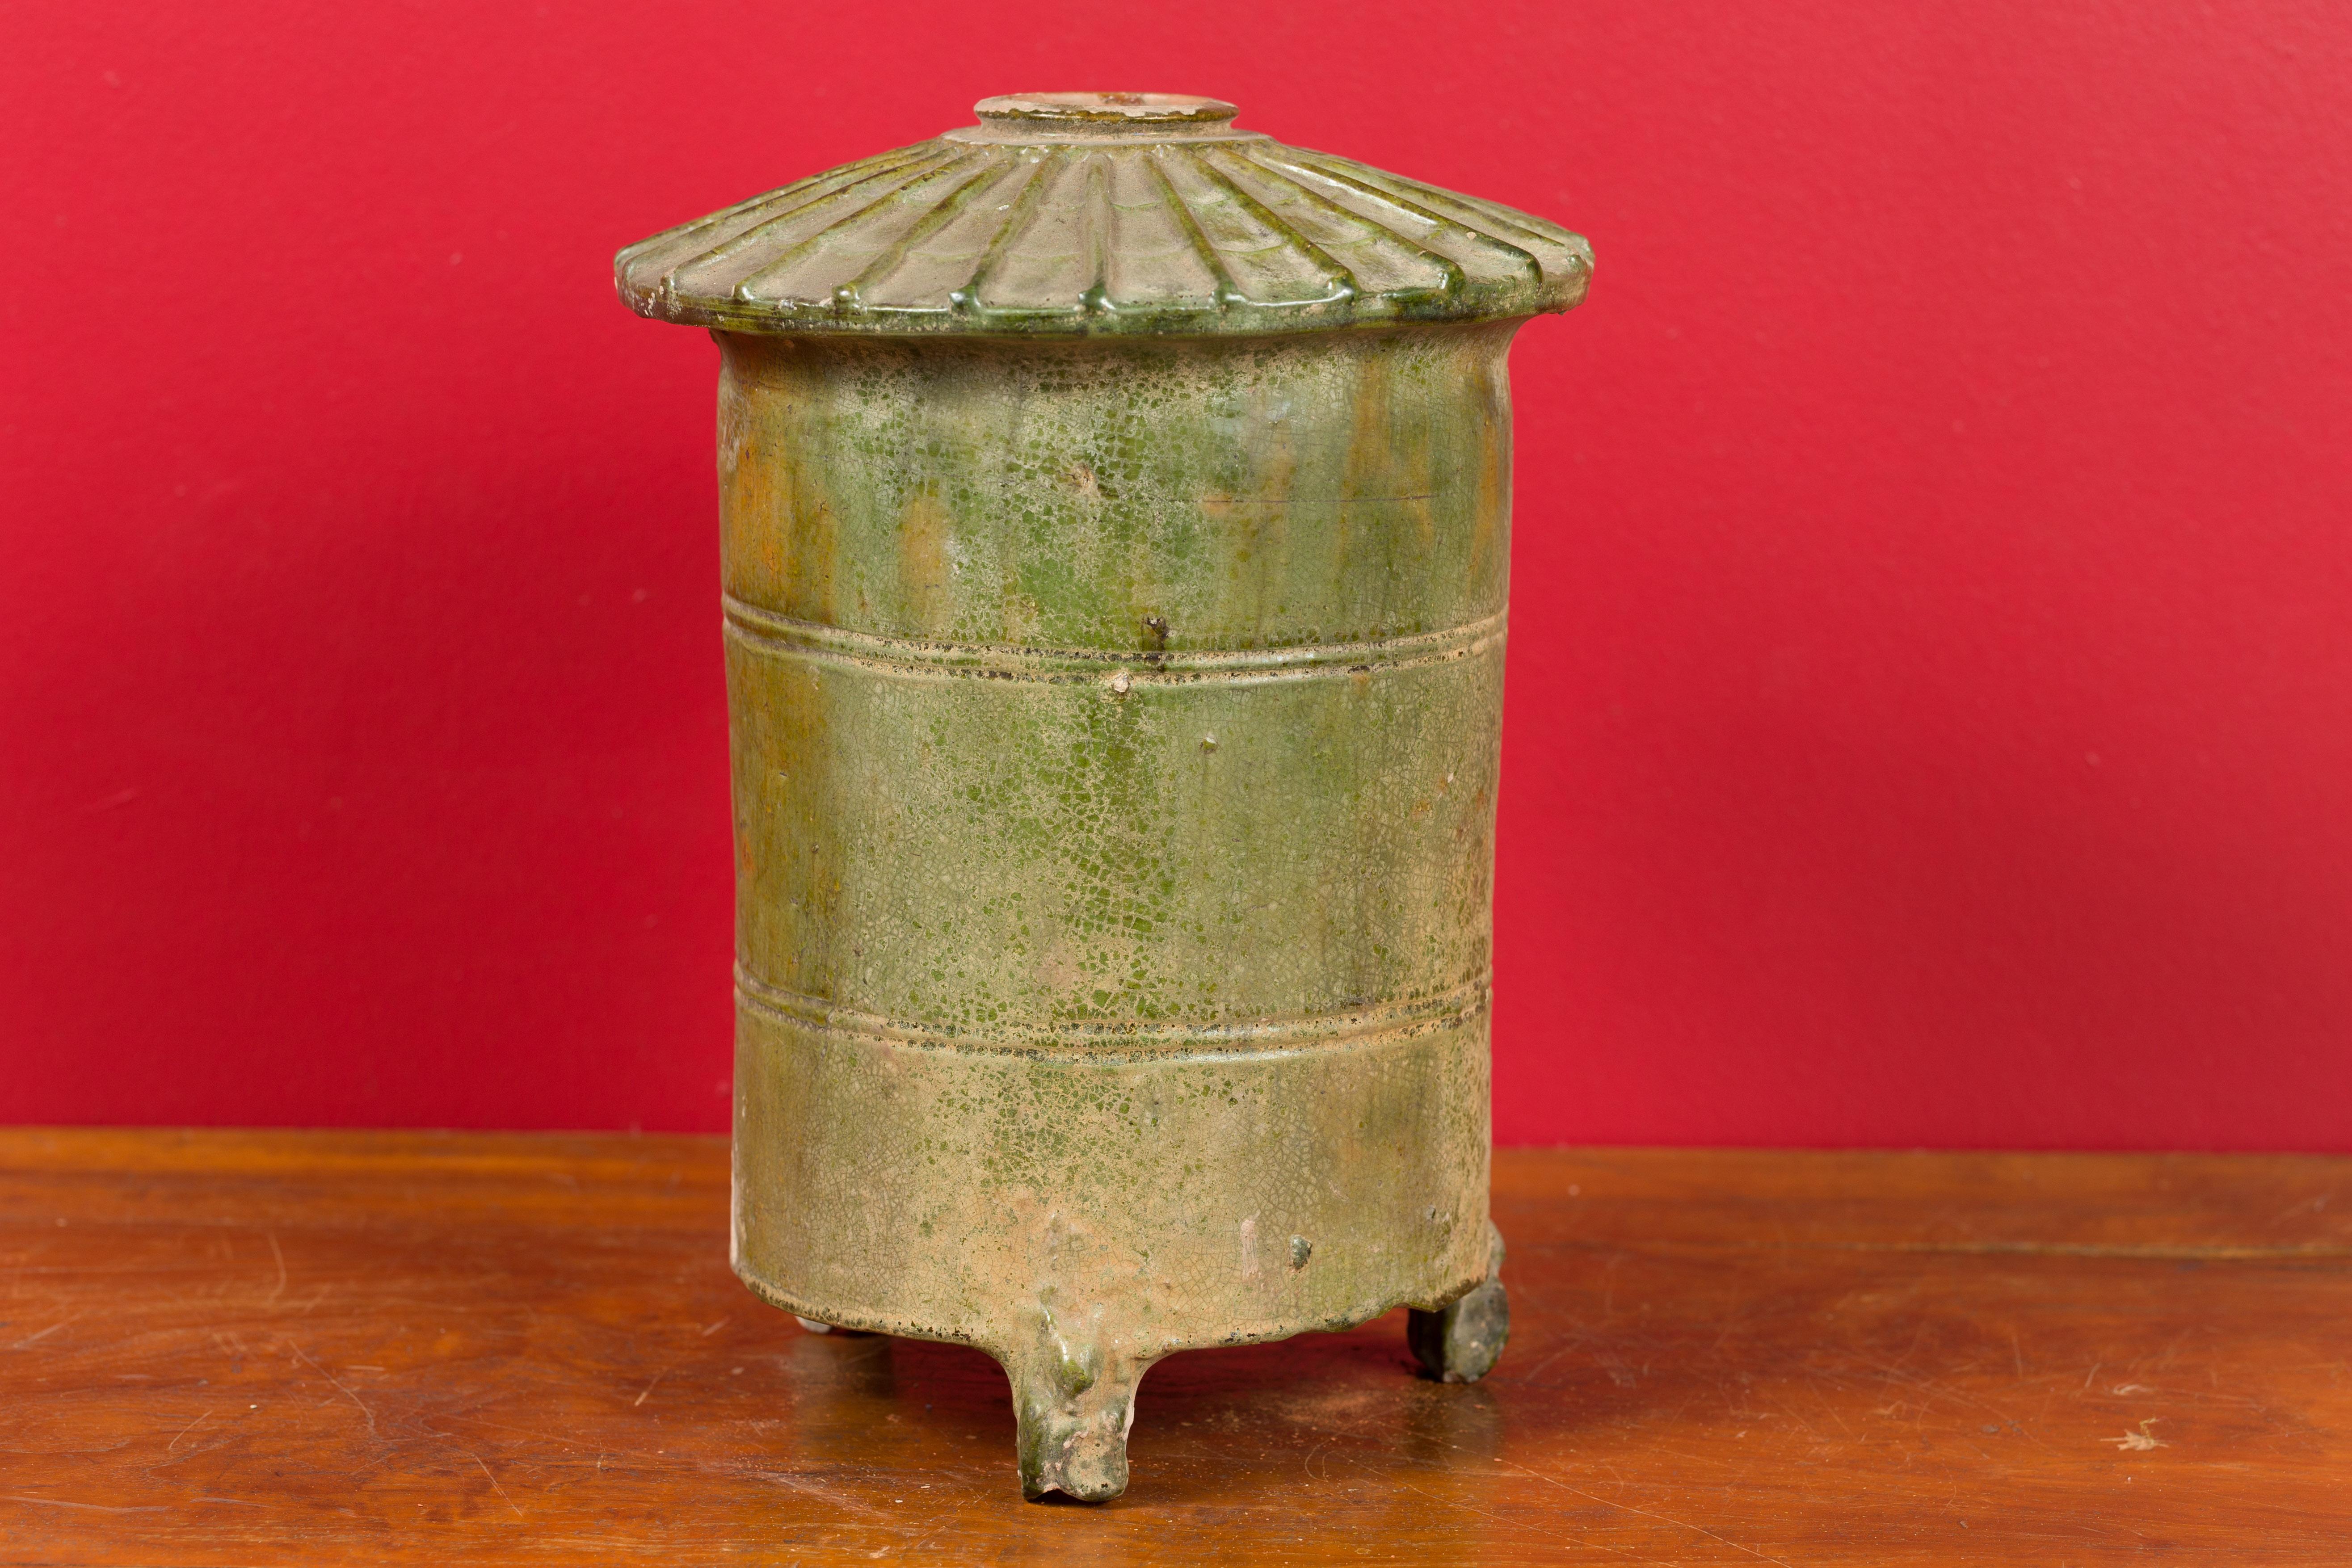 Petit Chinese Ming Dynasty 17th Century Terracotta Granary with Verdigris Patina For Sale 4